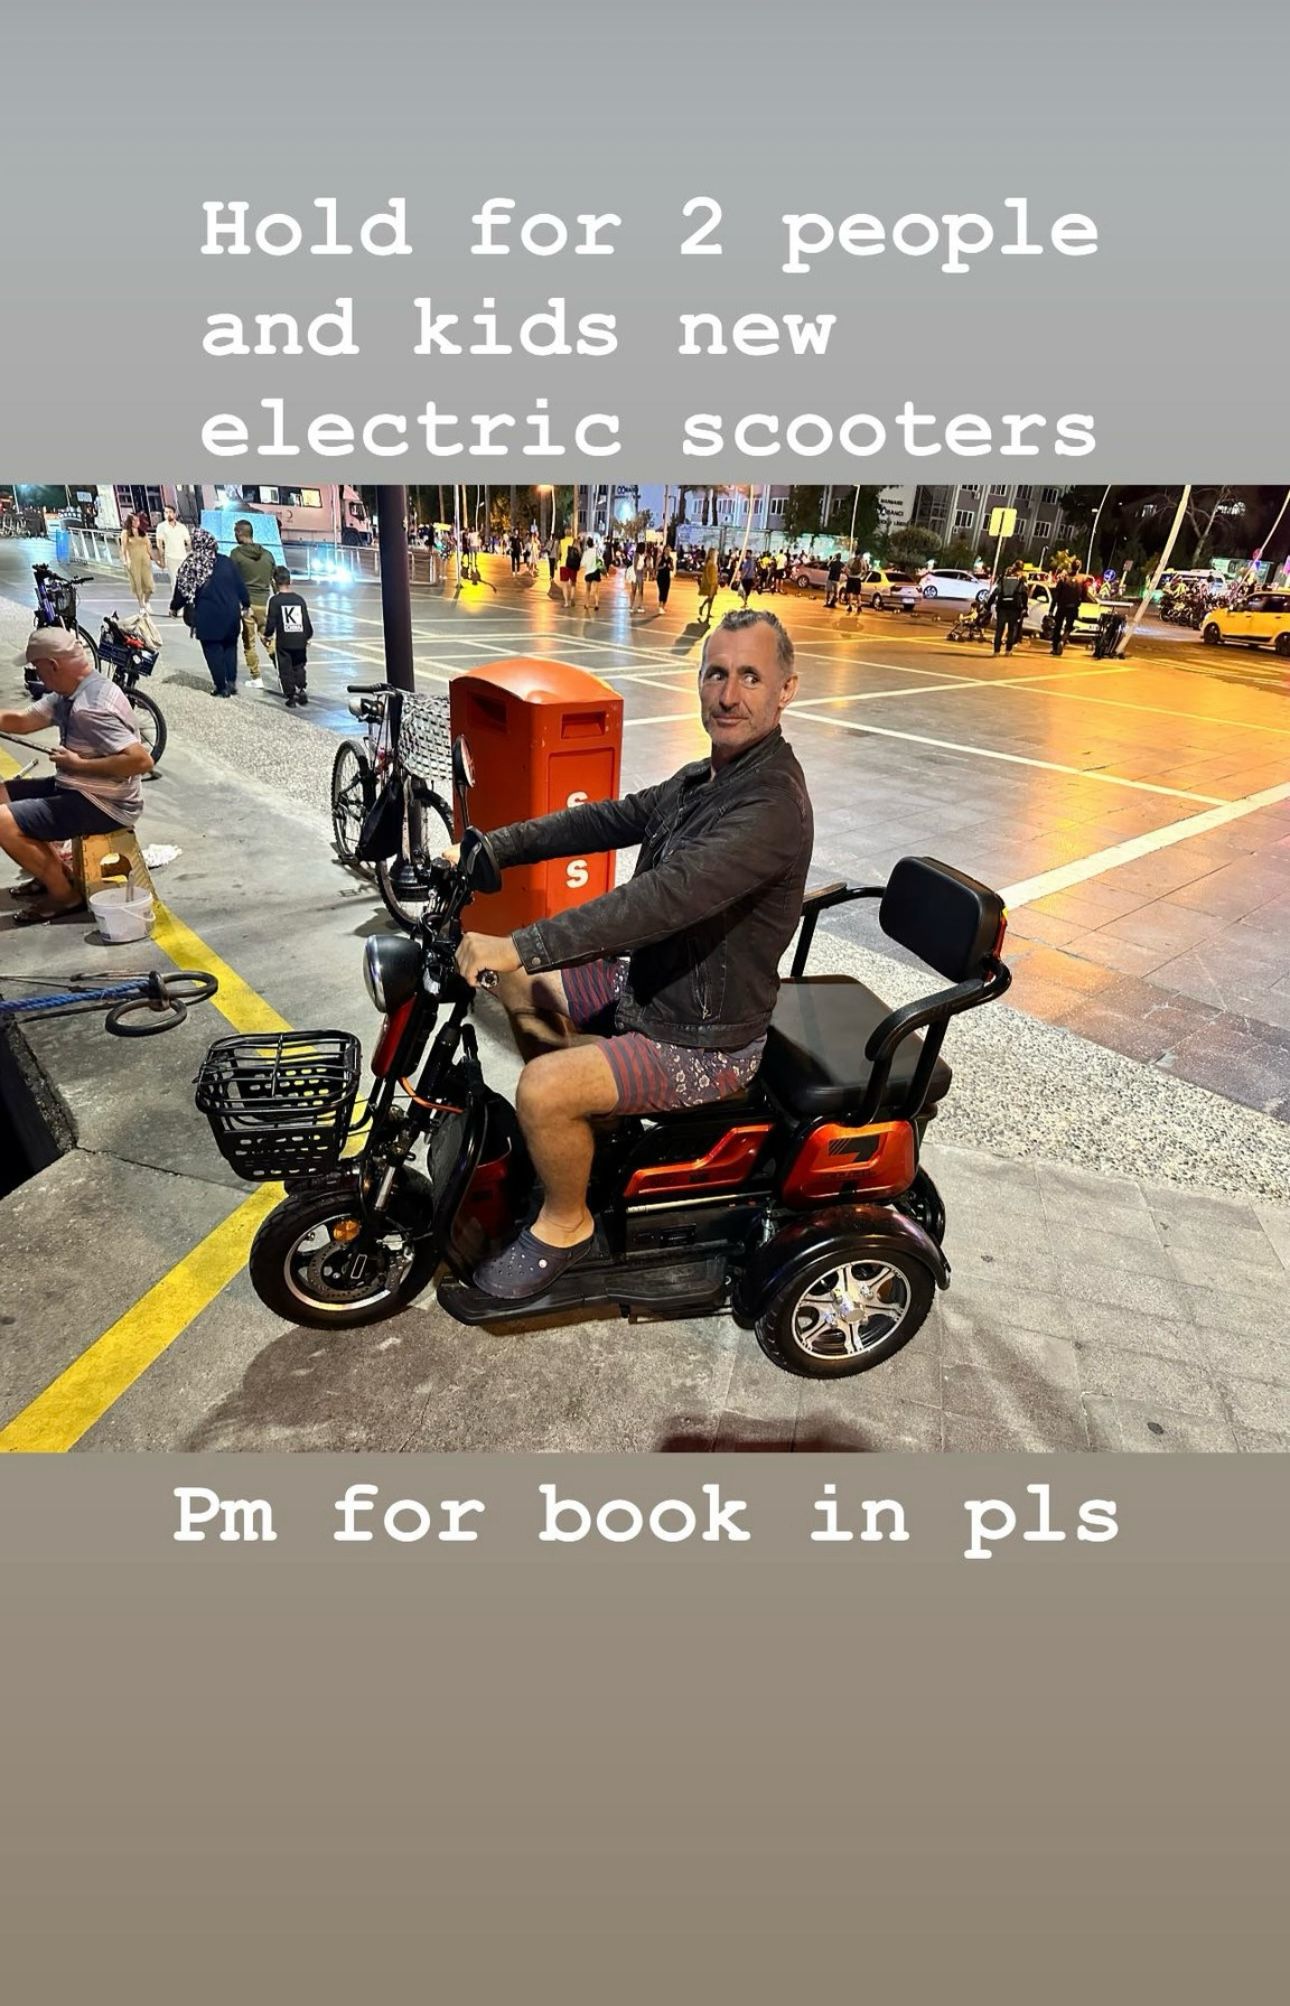 Electric Scooter for rent pm for price and book in pls Thank you